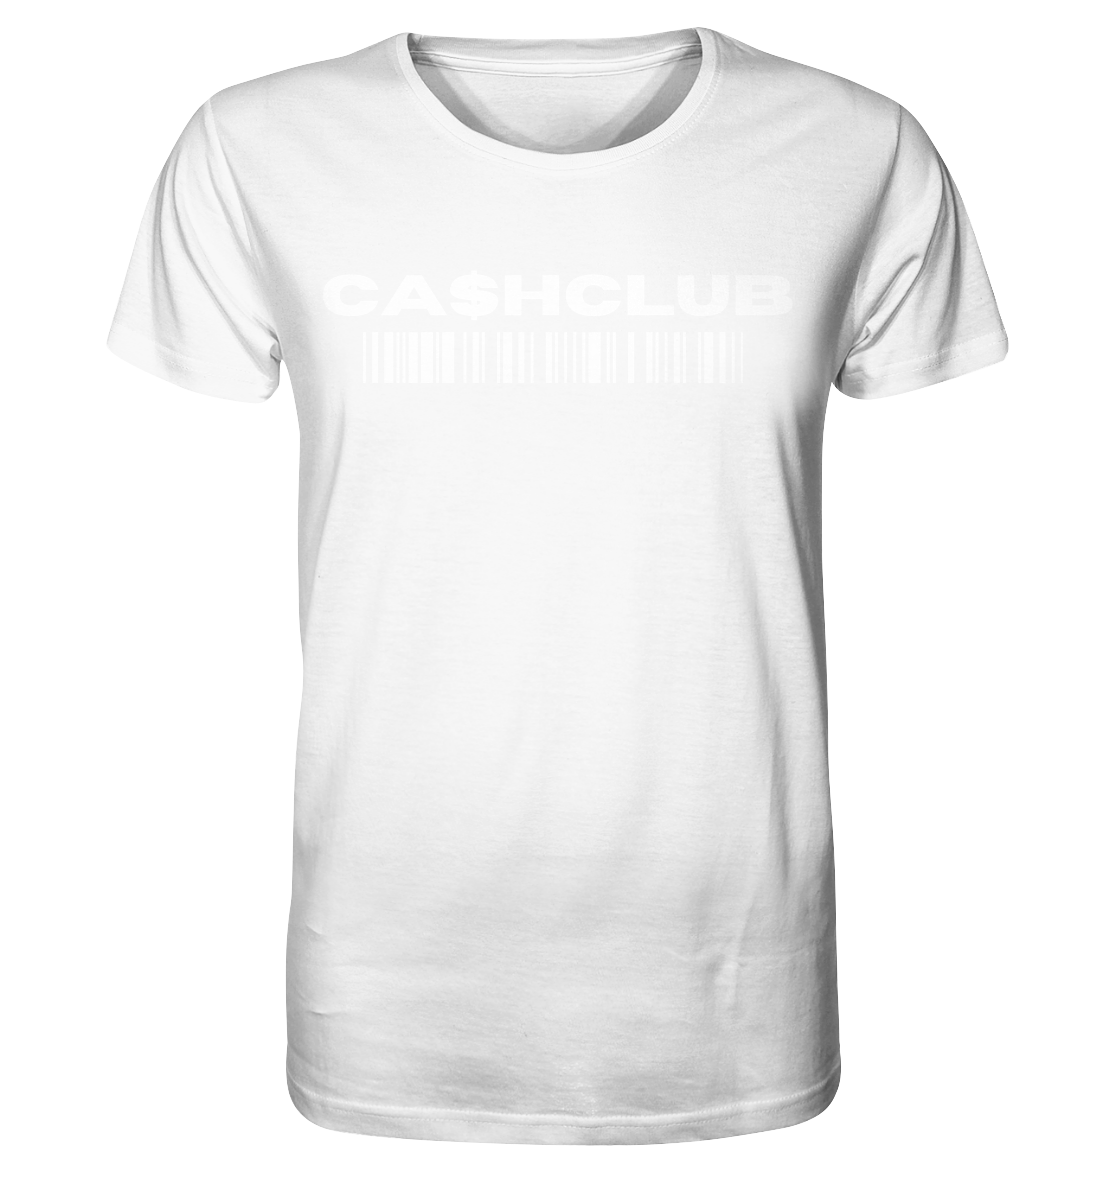 CA$H CLUB COLLECTION by LIMITLOS - Organic Shirt